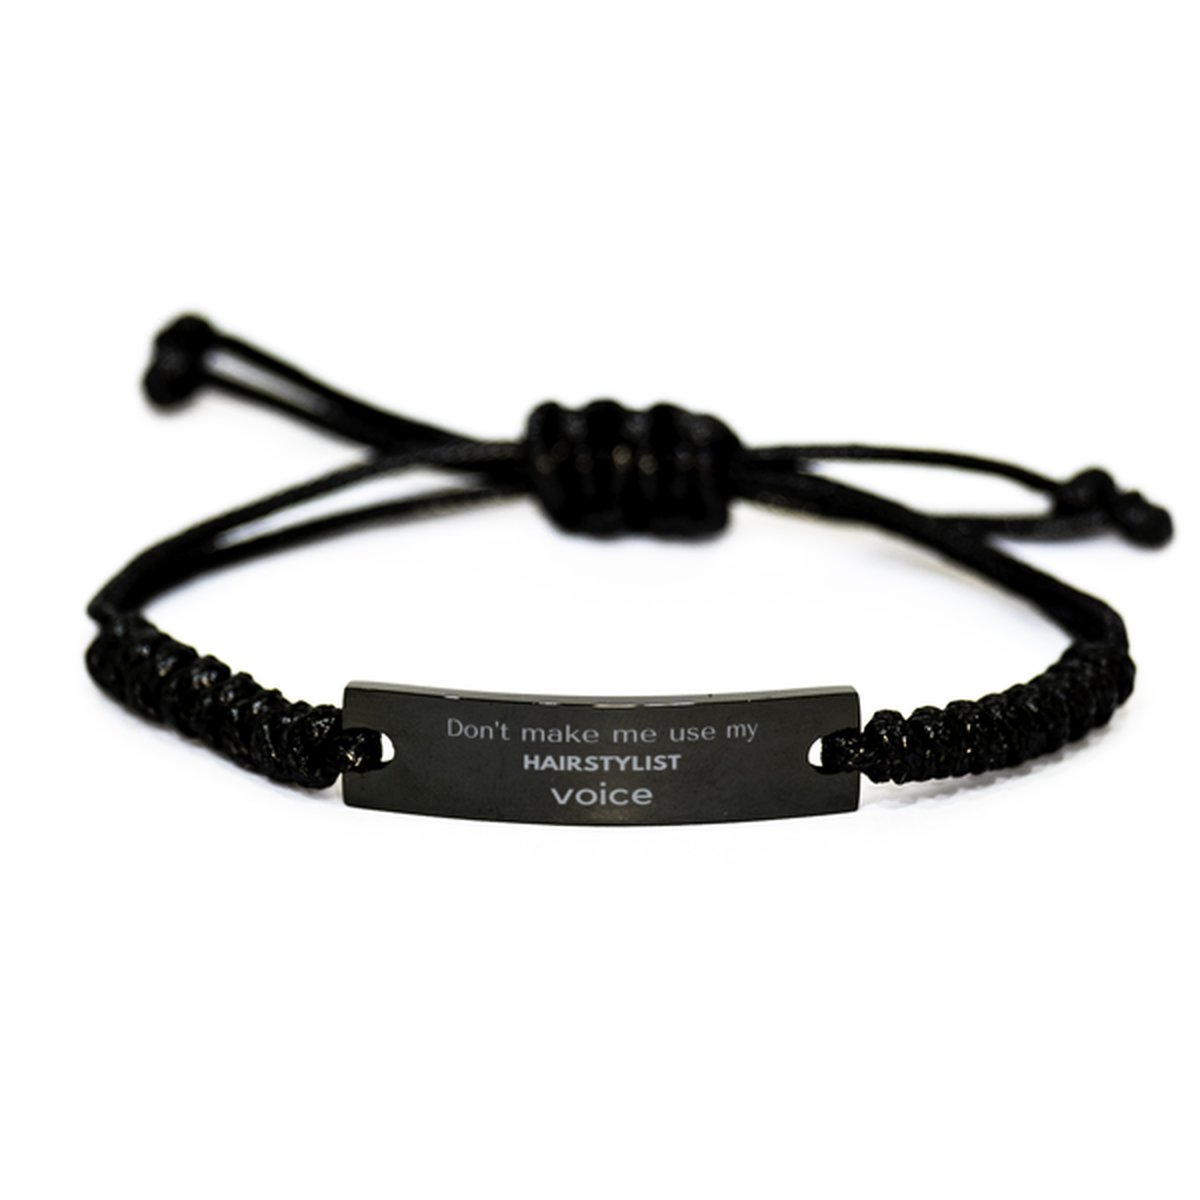 Don't make me use my Hairstylist voice, Sarcasm Hairstylist Gifts, Christmas Hairstylist Black Rope Bracelet Birthday Unique Gifts For Hairstylist Coworkers, Men, Women, Colleague, Friends